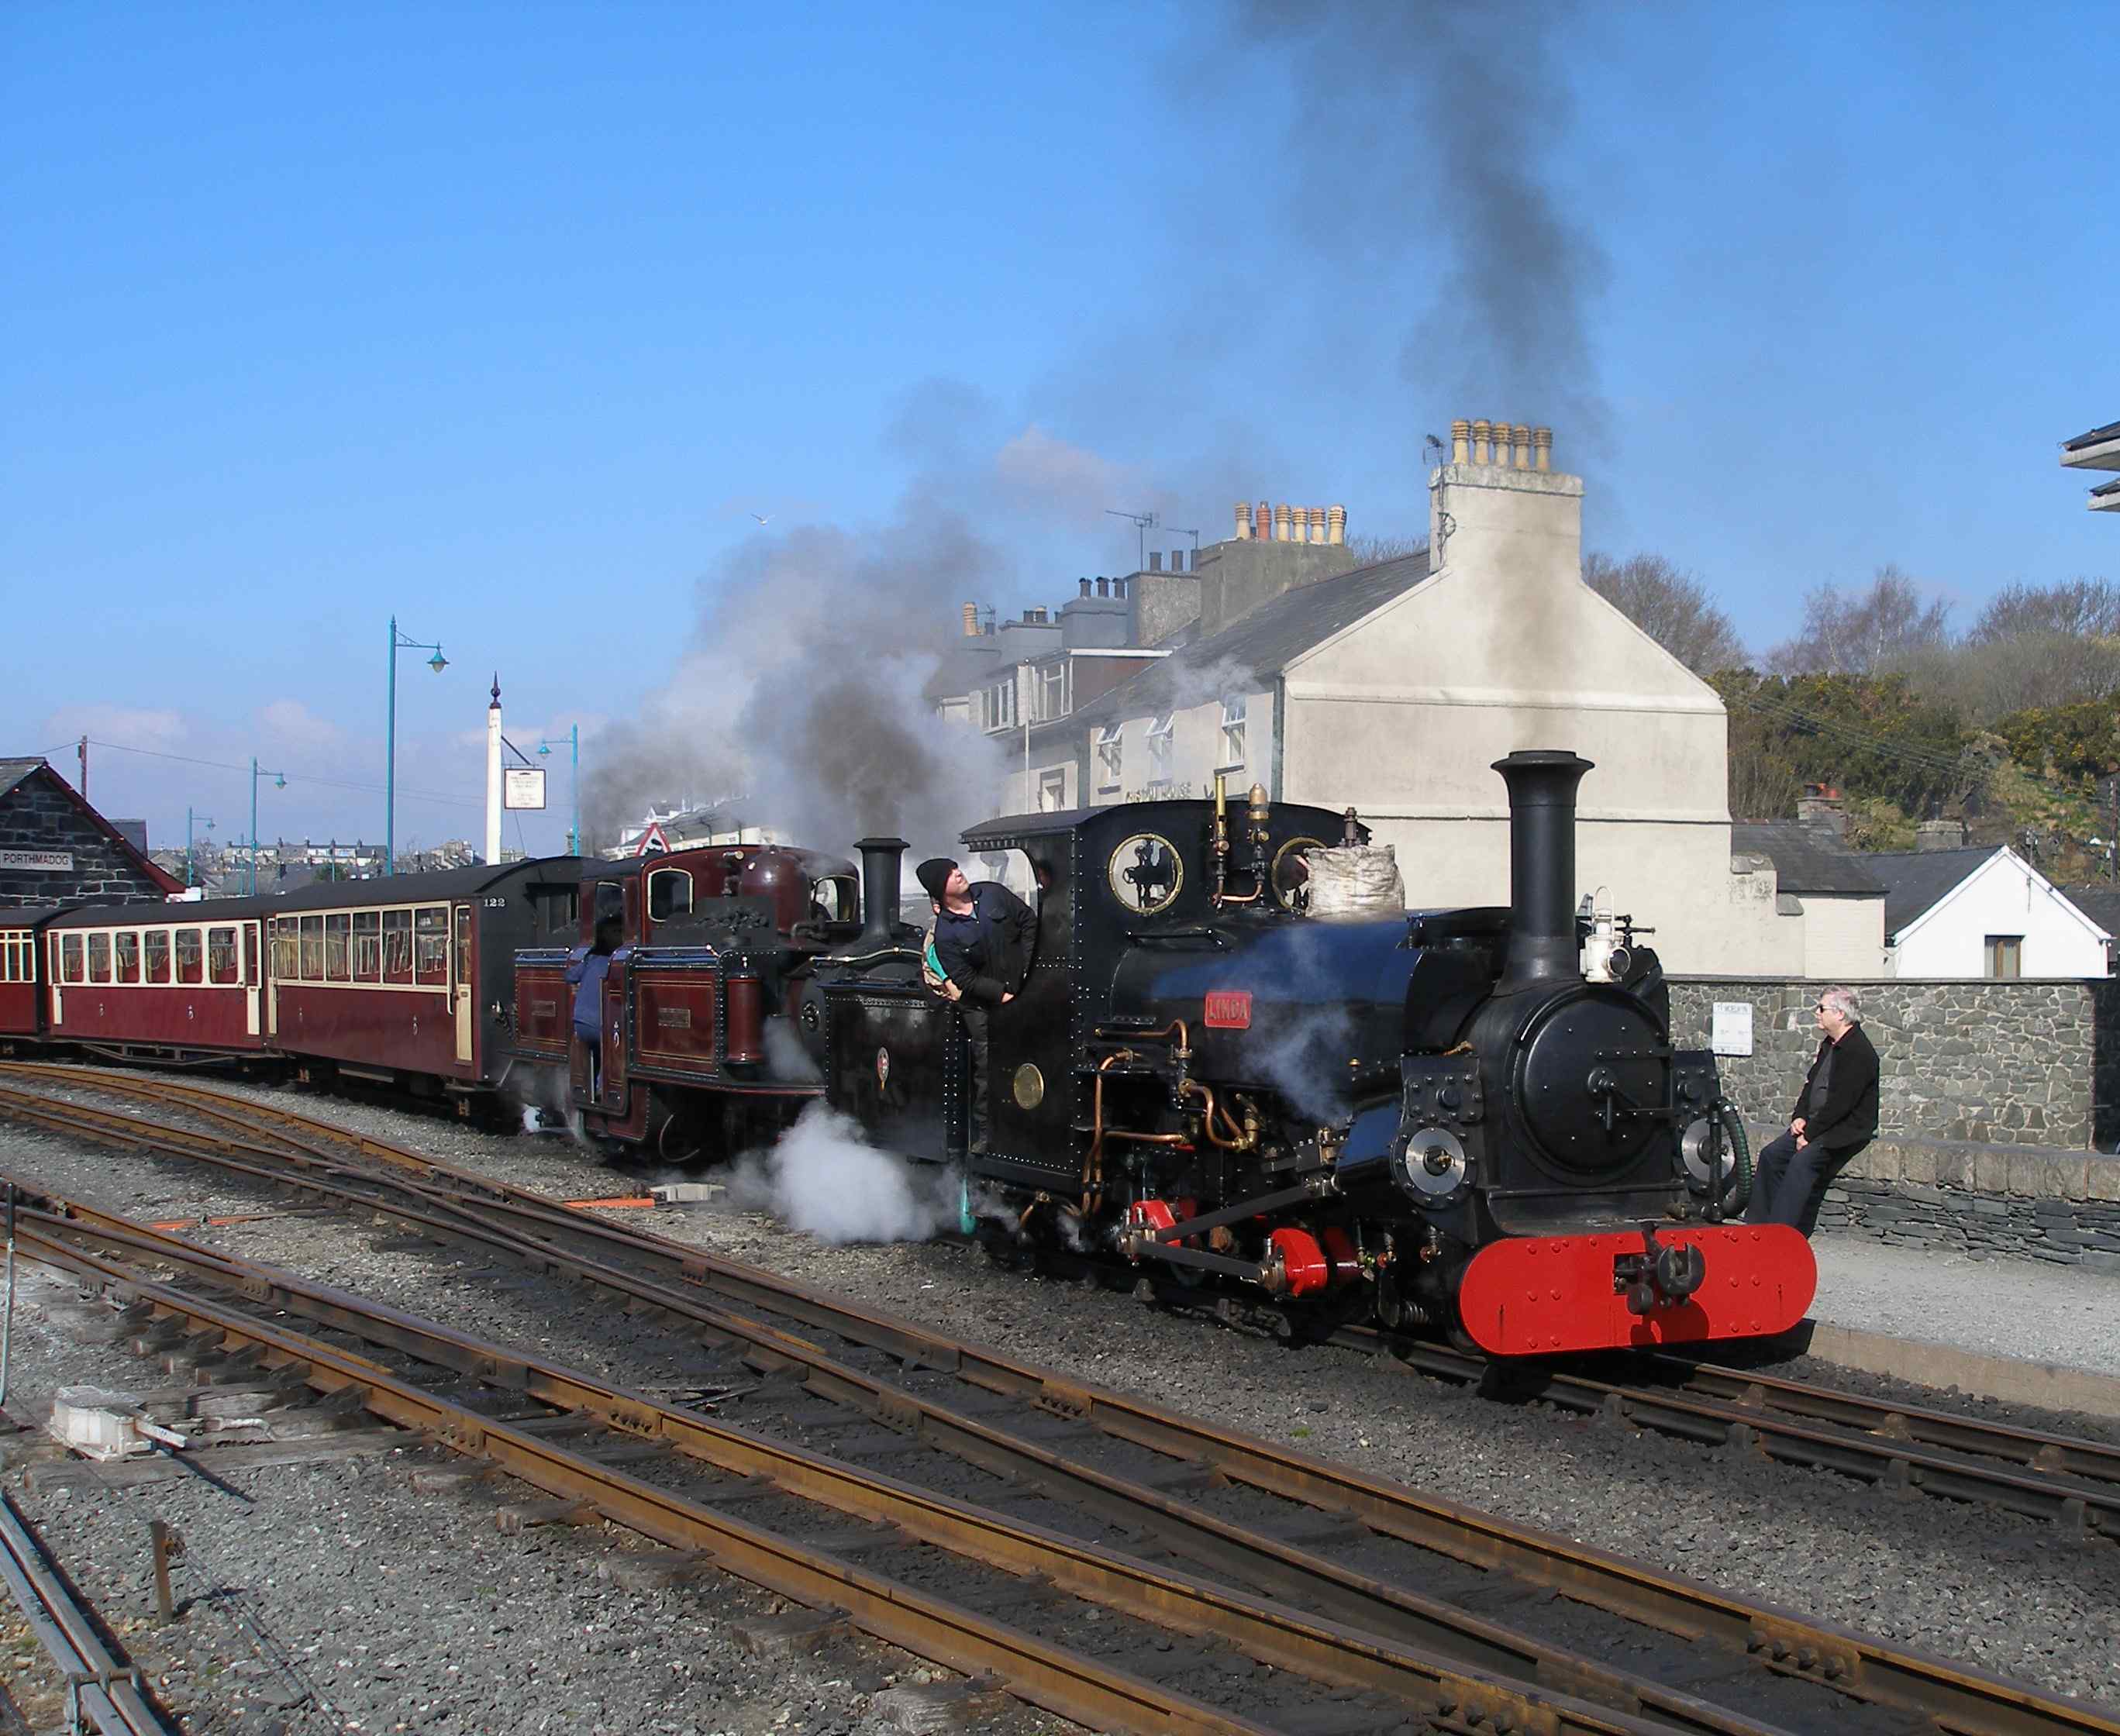 'Linda' and 'Merddin Emrys' set off with the empty coaching stock (ecs) for Blaenau Ffestiniog. Both locos were converted to oil firing in the 1970s. This was undertaken as the railway's medium-sized locos had smaller grate areas that reflected their industrial origins ('Linda' and 'Blanche') and therefore were more prone to fire-throwing when worked hard - which was virtually all the time! 'Merddin Emrys' had a better ratio of grate to traffic effort and arguably was less prone to fire throwing and might have been better kept as a coal burner. It's conversion to coal required major work on its tanks, which at the time were virtually brand new. A second set of traditionally-styled tanks were made at the same time for 'Earl of Merioneth' but these have not yet been fitted, and these to will have to be modified for coal.